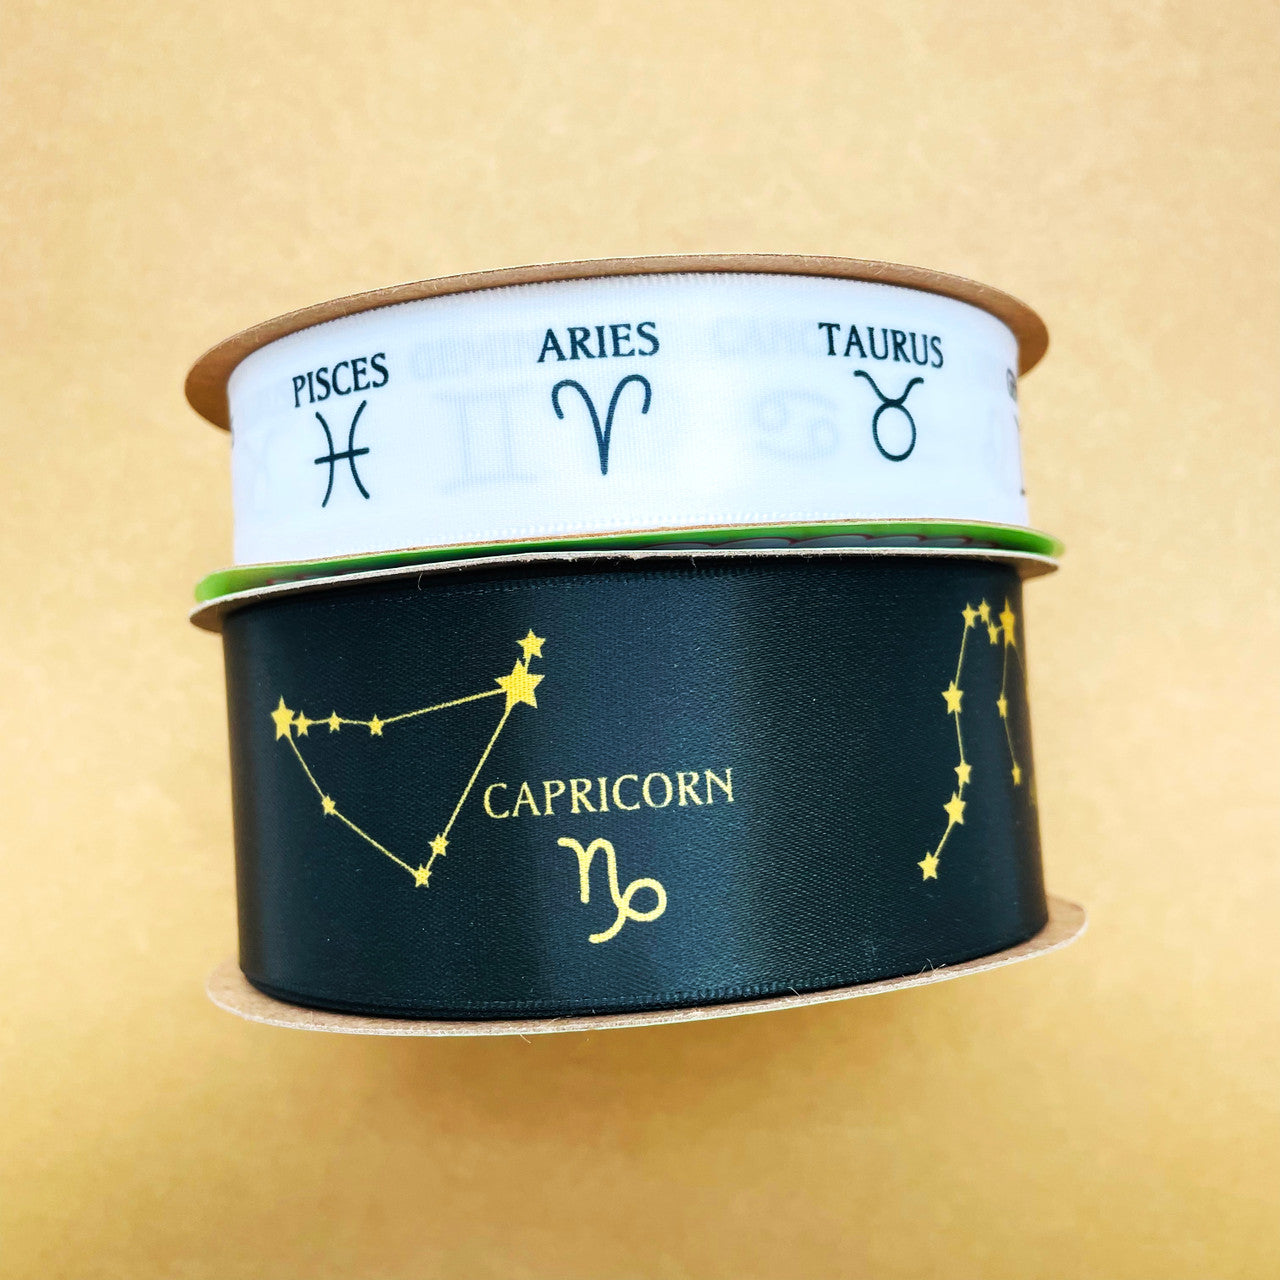 Mix and match our constellation ribbon with our zodiac symbols to make a lovely package or party decor!